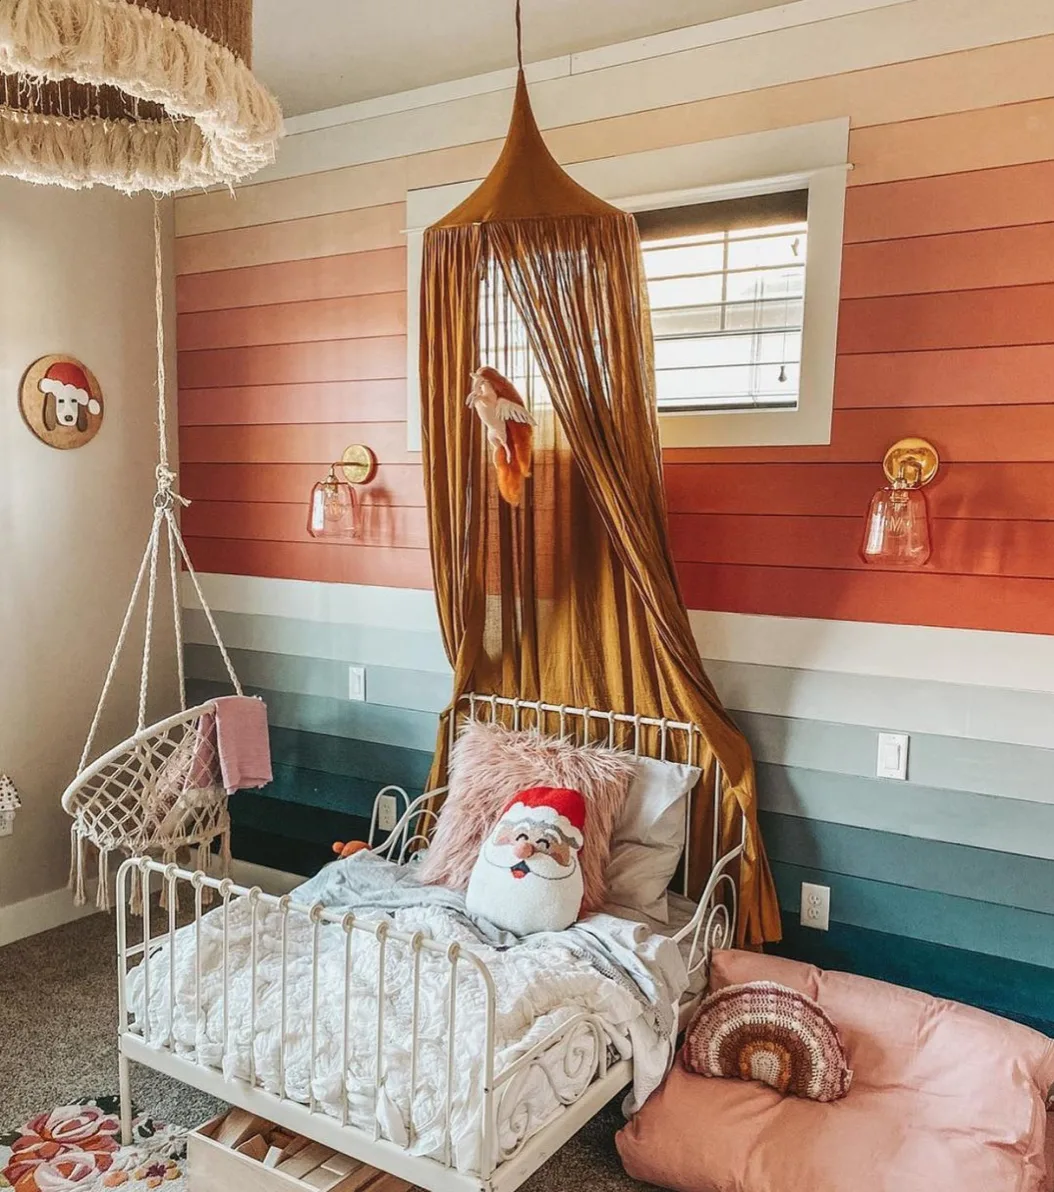 Wood Accent Walls
Girls Room by @knoxandnavy